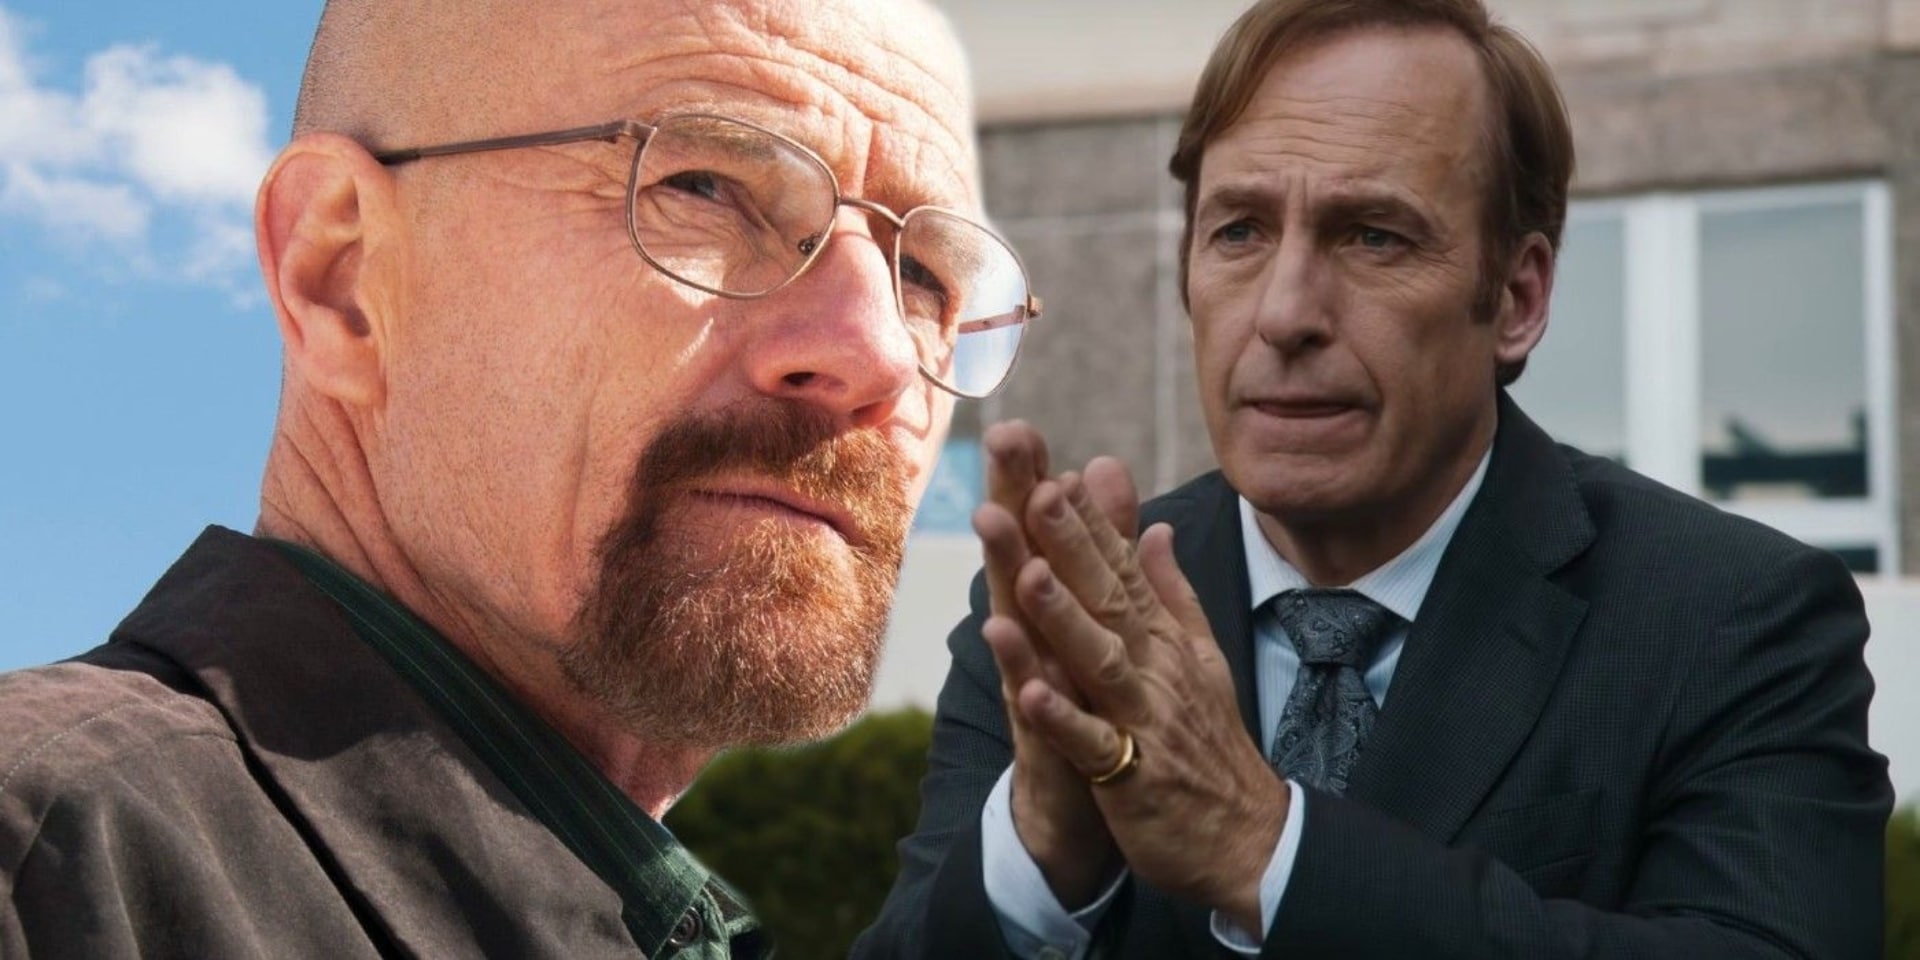 Bryan-Cranston-as-Walter-White-in-Breaking-Bad-and-Bob-Odenkirk-as-Jimmy-GamersRD (1)